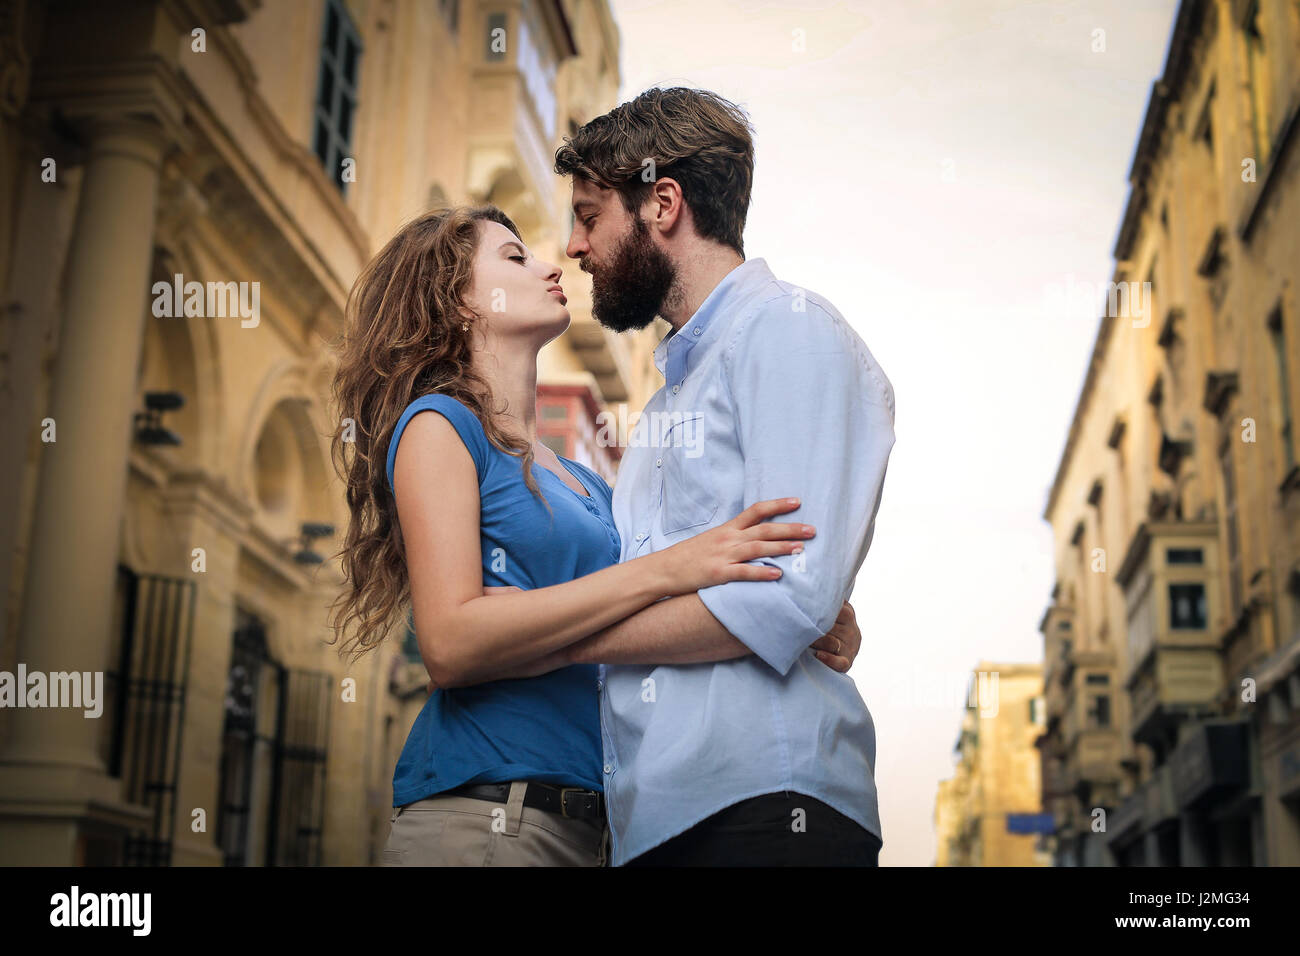 Couple almost kissing outside Stock Photo